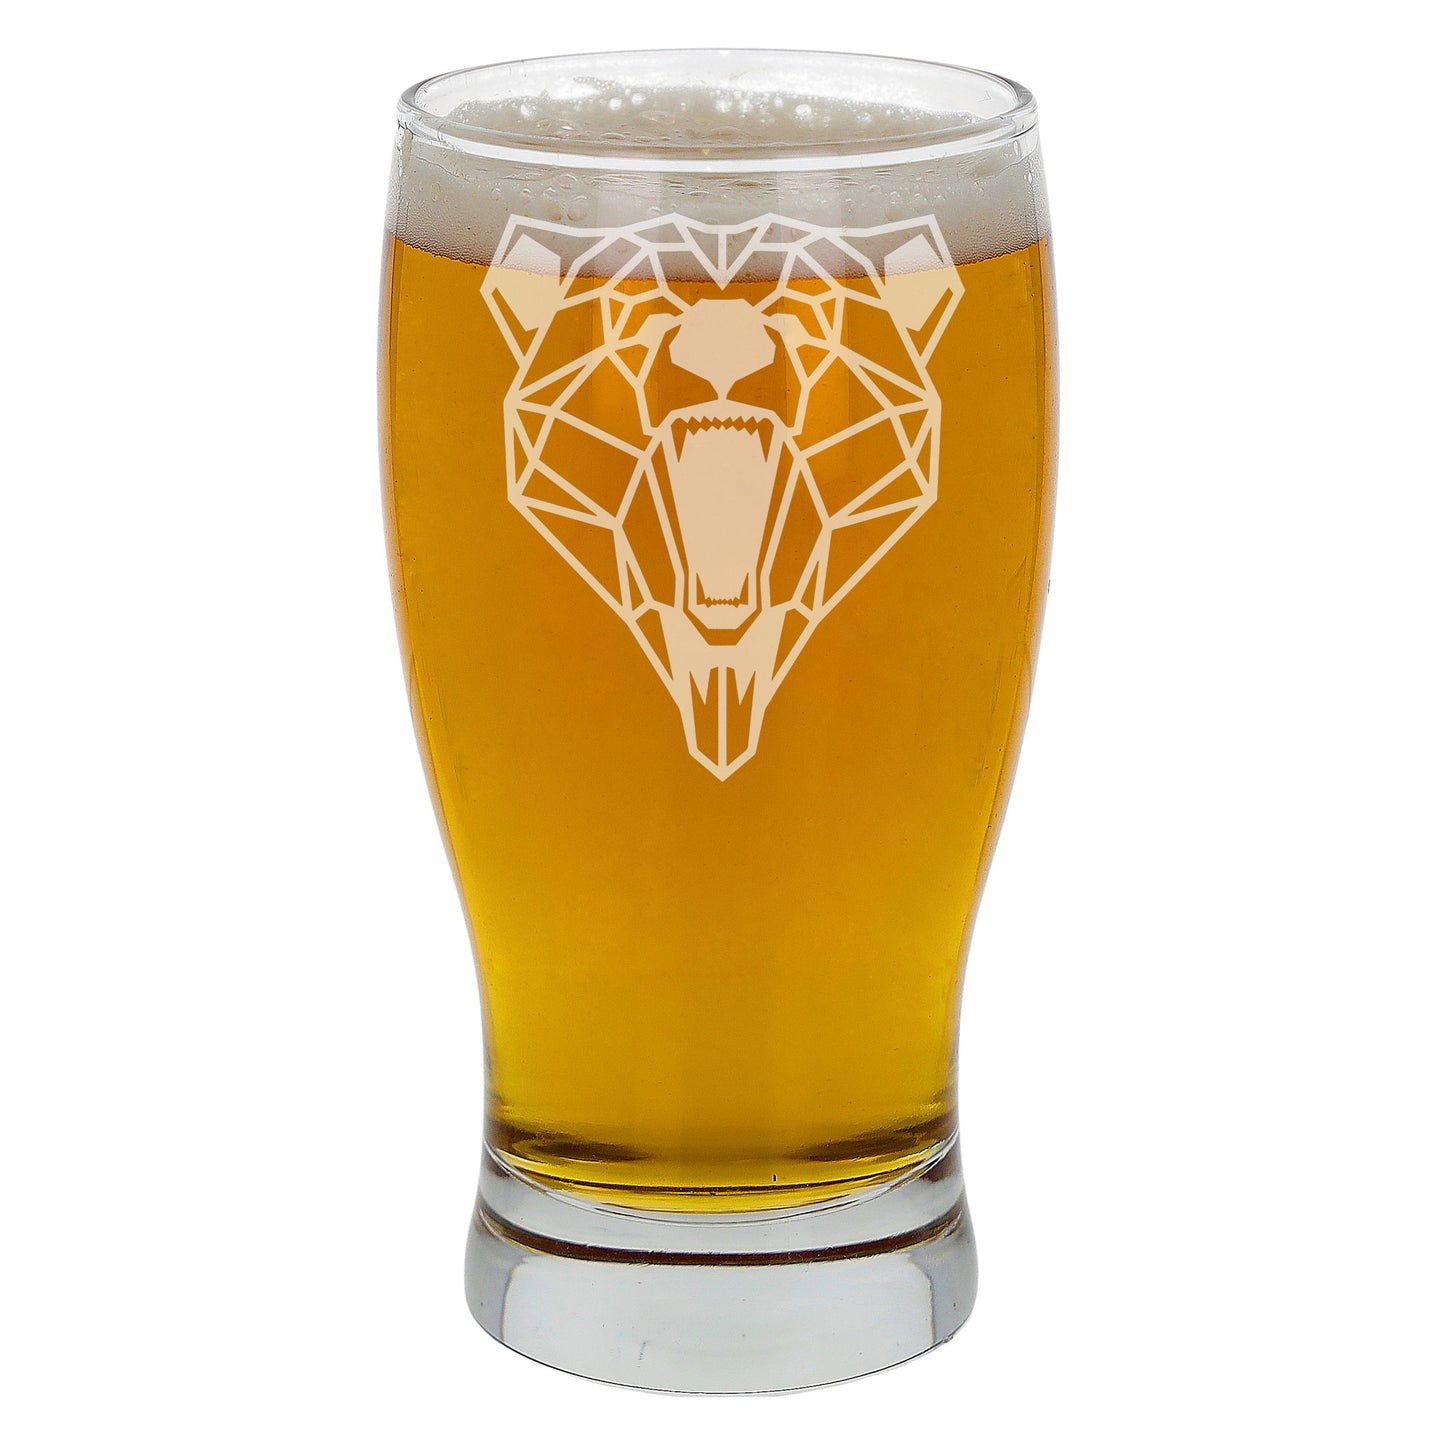 Grizzly Bear Engraved Beer Pint Glass  - Always Looking Good -   